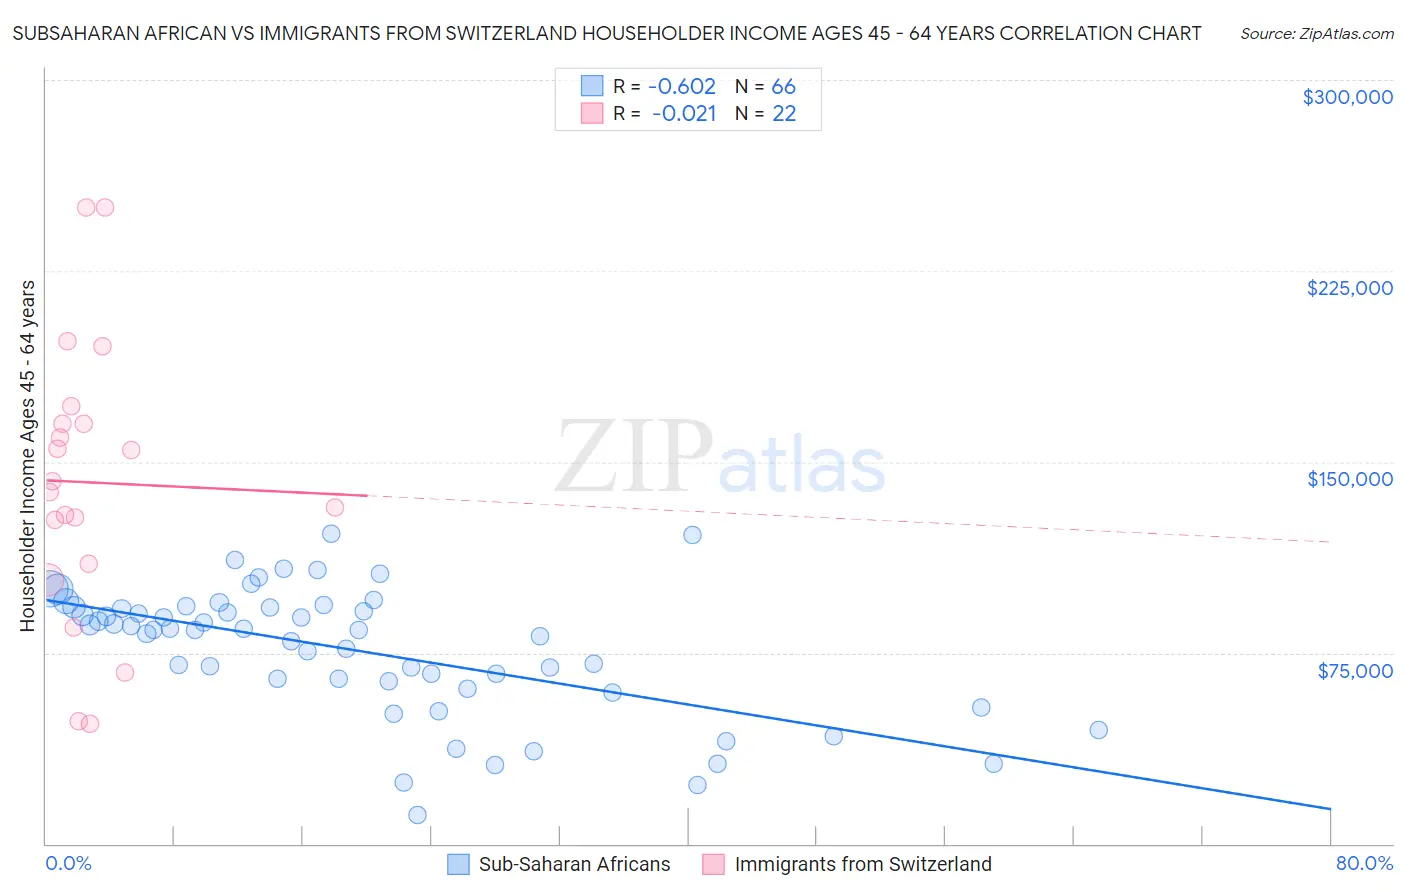 Subsaharan African vs Immigrants from Switzerland Householder Income Ages 45 - 64 years